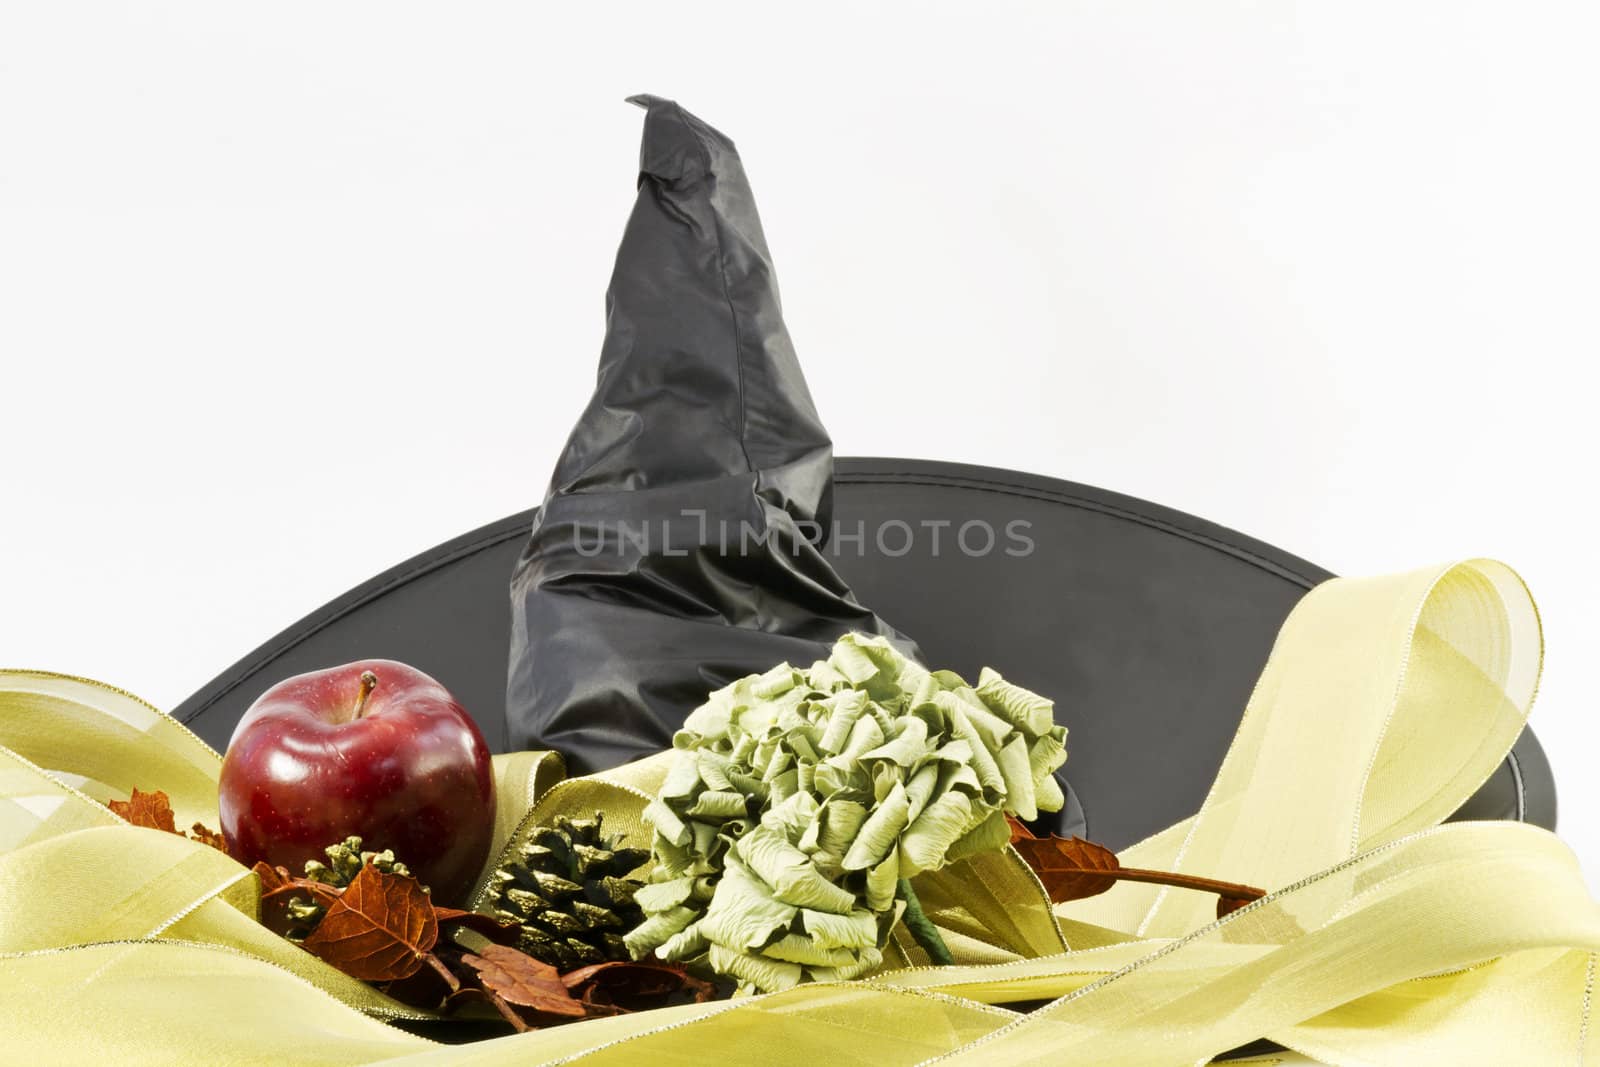 Black witch's hat is placed in a feminine tumble of autumn objects including an apple, pine cones, dried leaves, dried green blossom, and gold ribbon.